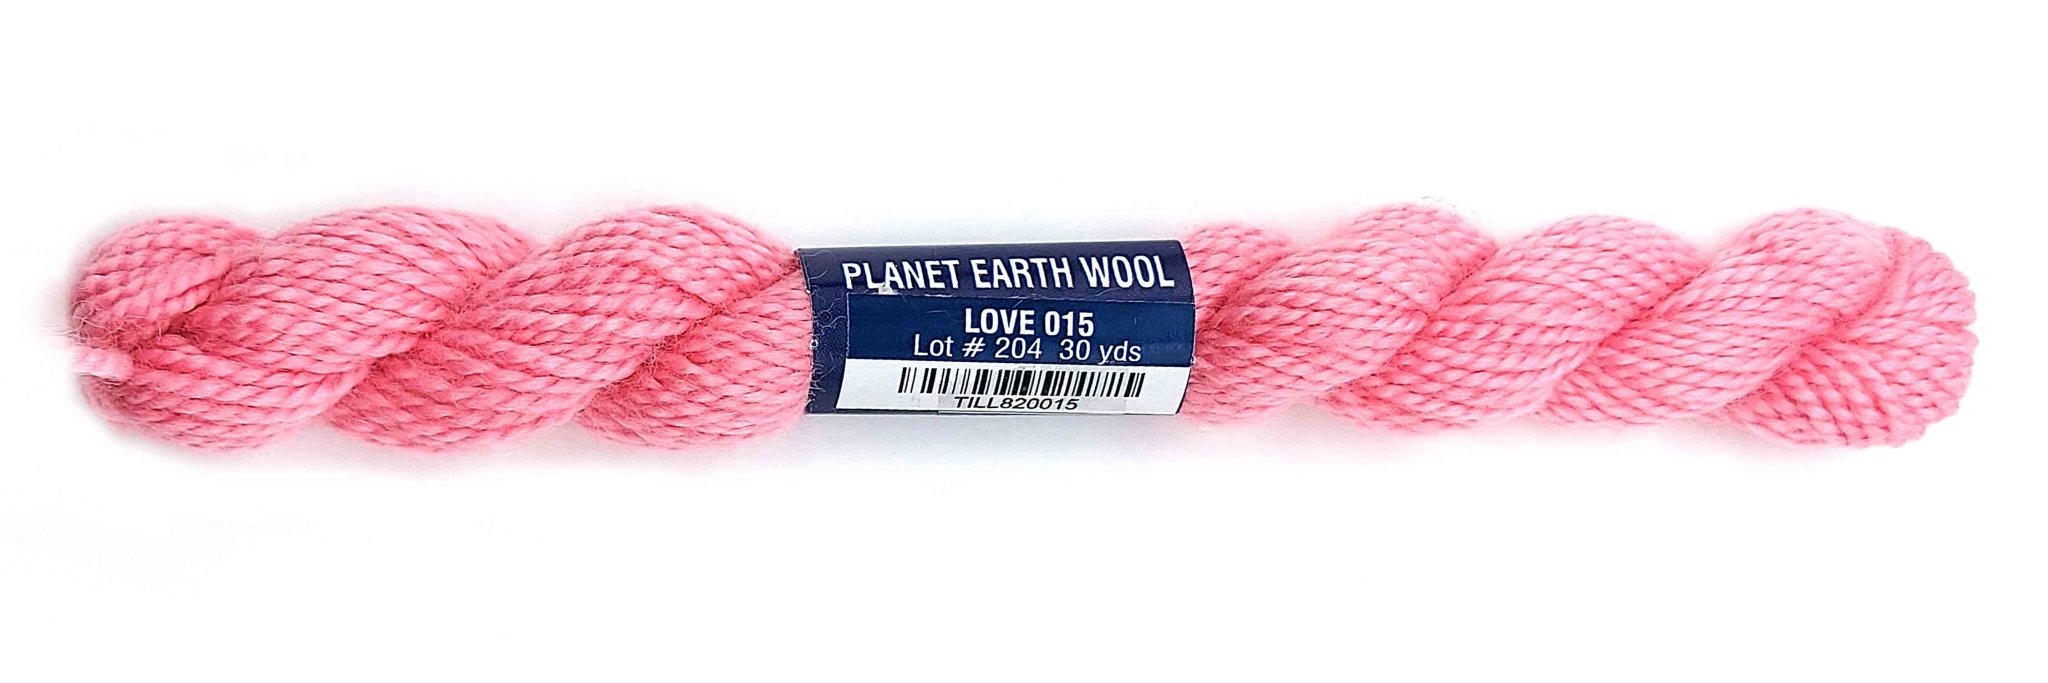 Planet Earth Wool 015 Love - The Flying Needles